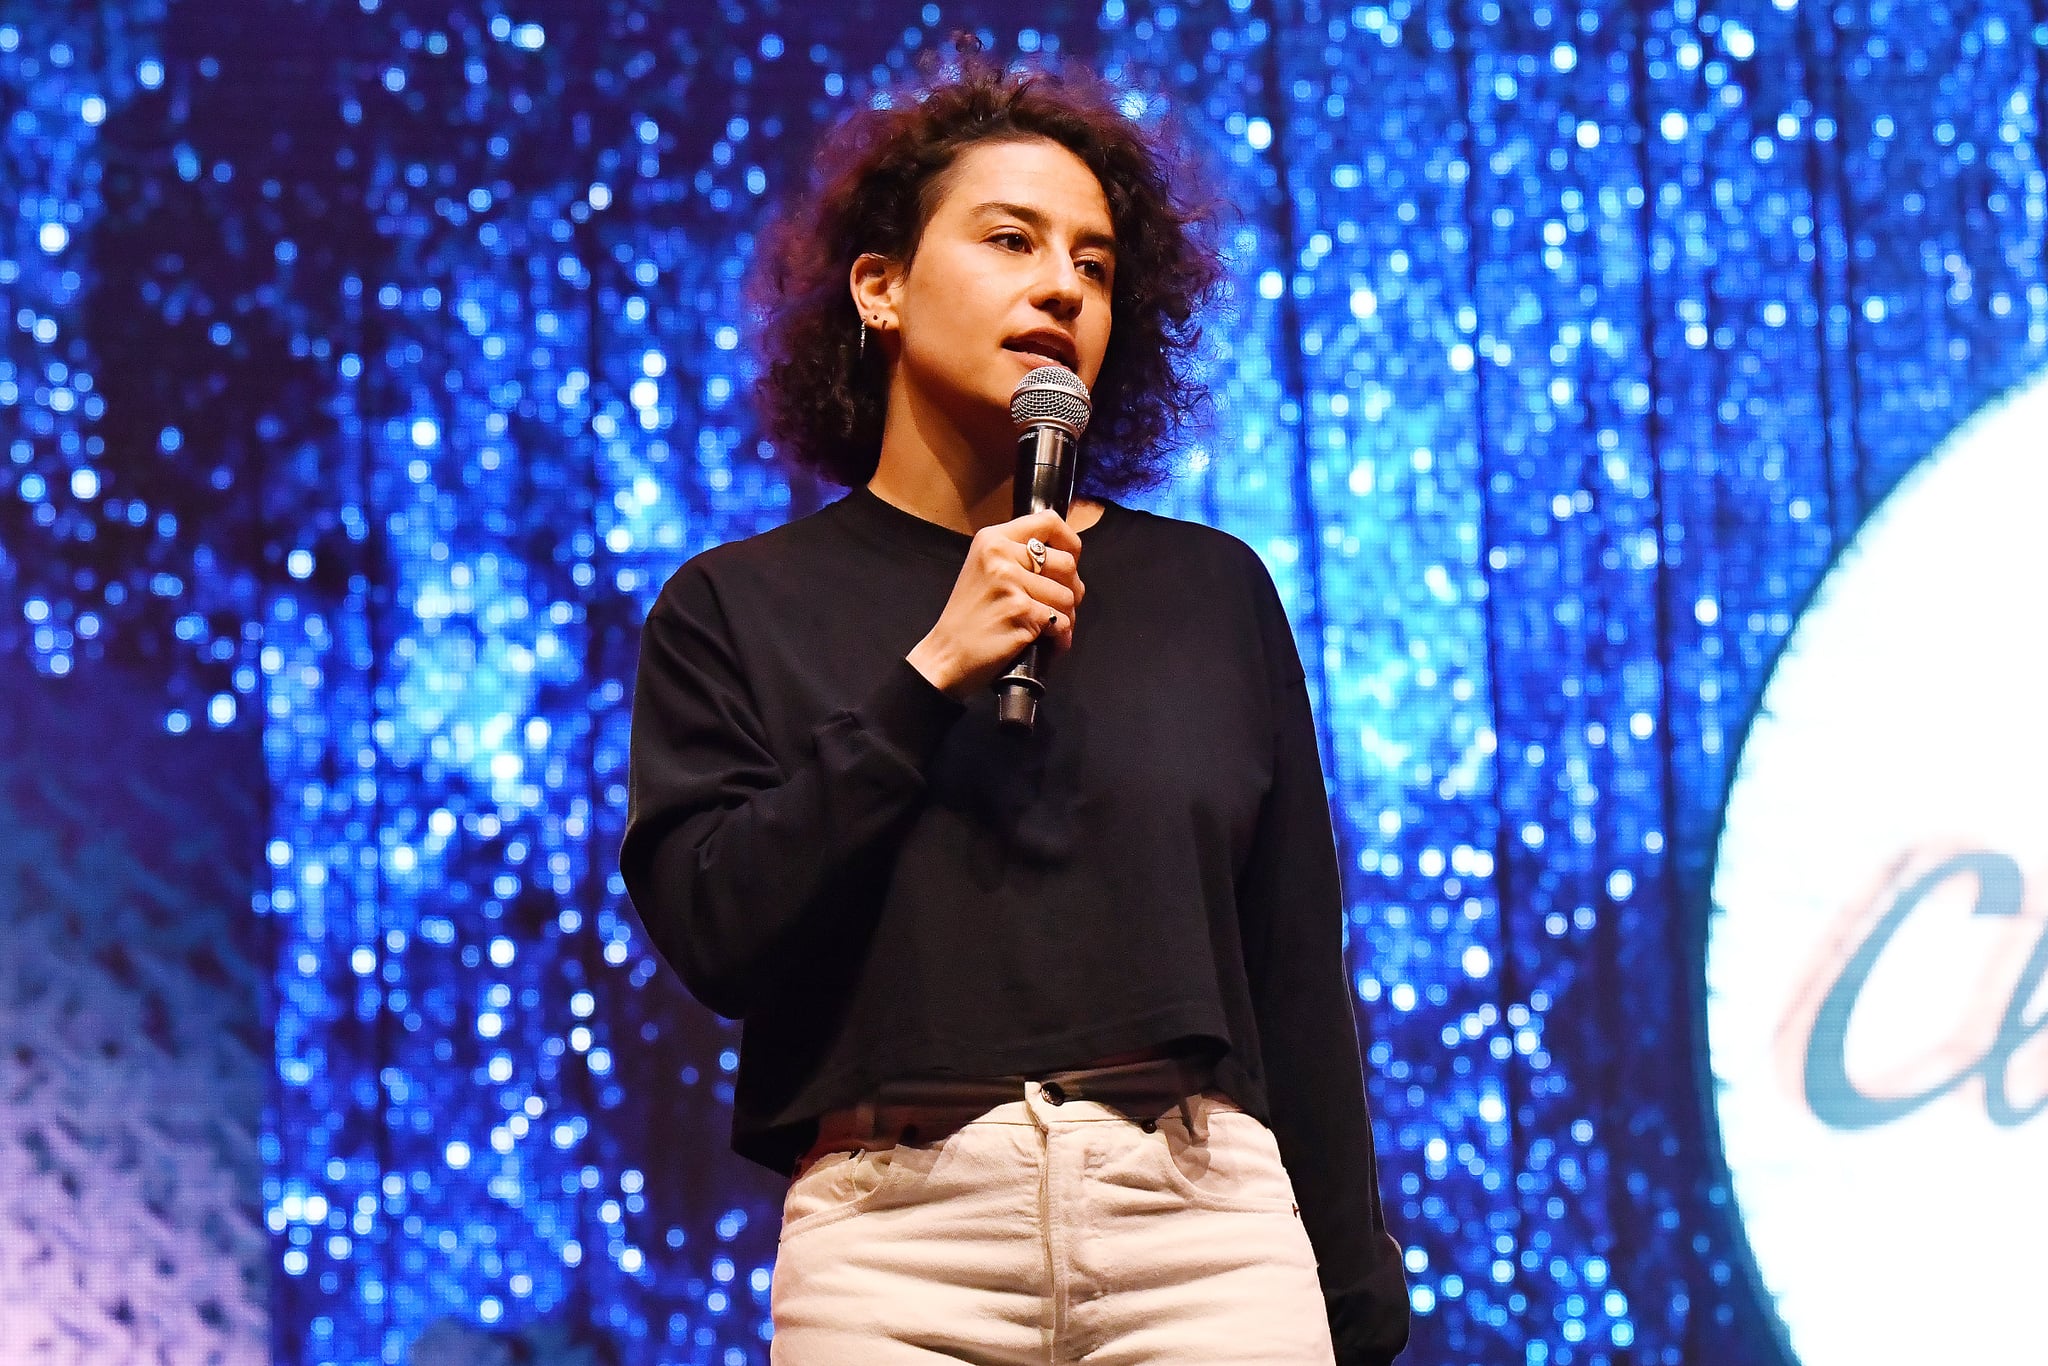 SAN FRANCISCO, CALIFORNIA - JUNE 21: Ilana Glazer performs onstage at the 2019 Clusterfest on June 21, 2019 in San Francisco, California. (Photo by Jeff Kravitz/FilmMagic for Clusterfest)